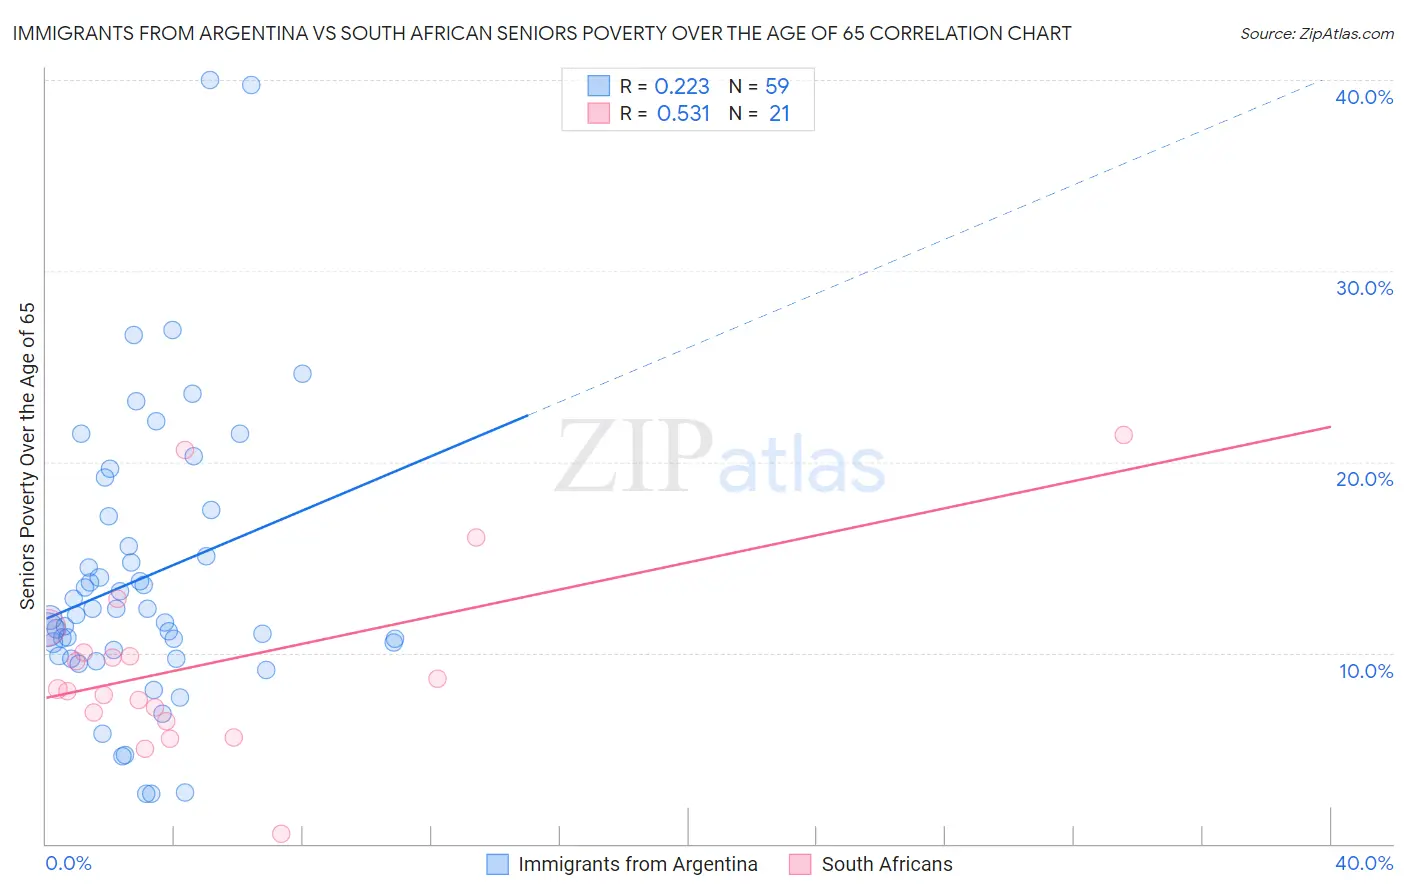 Immigrants from Argentina vs South African Seniors Poverty Over the Age of 65